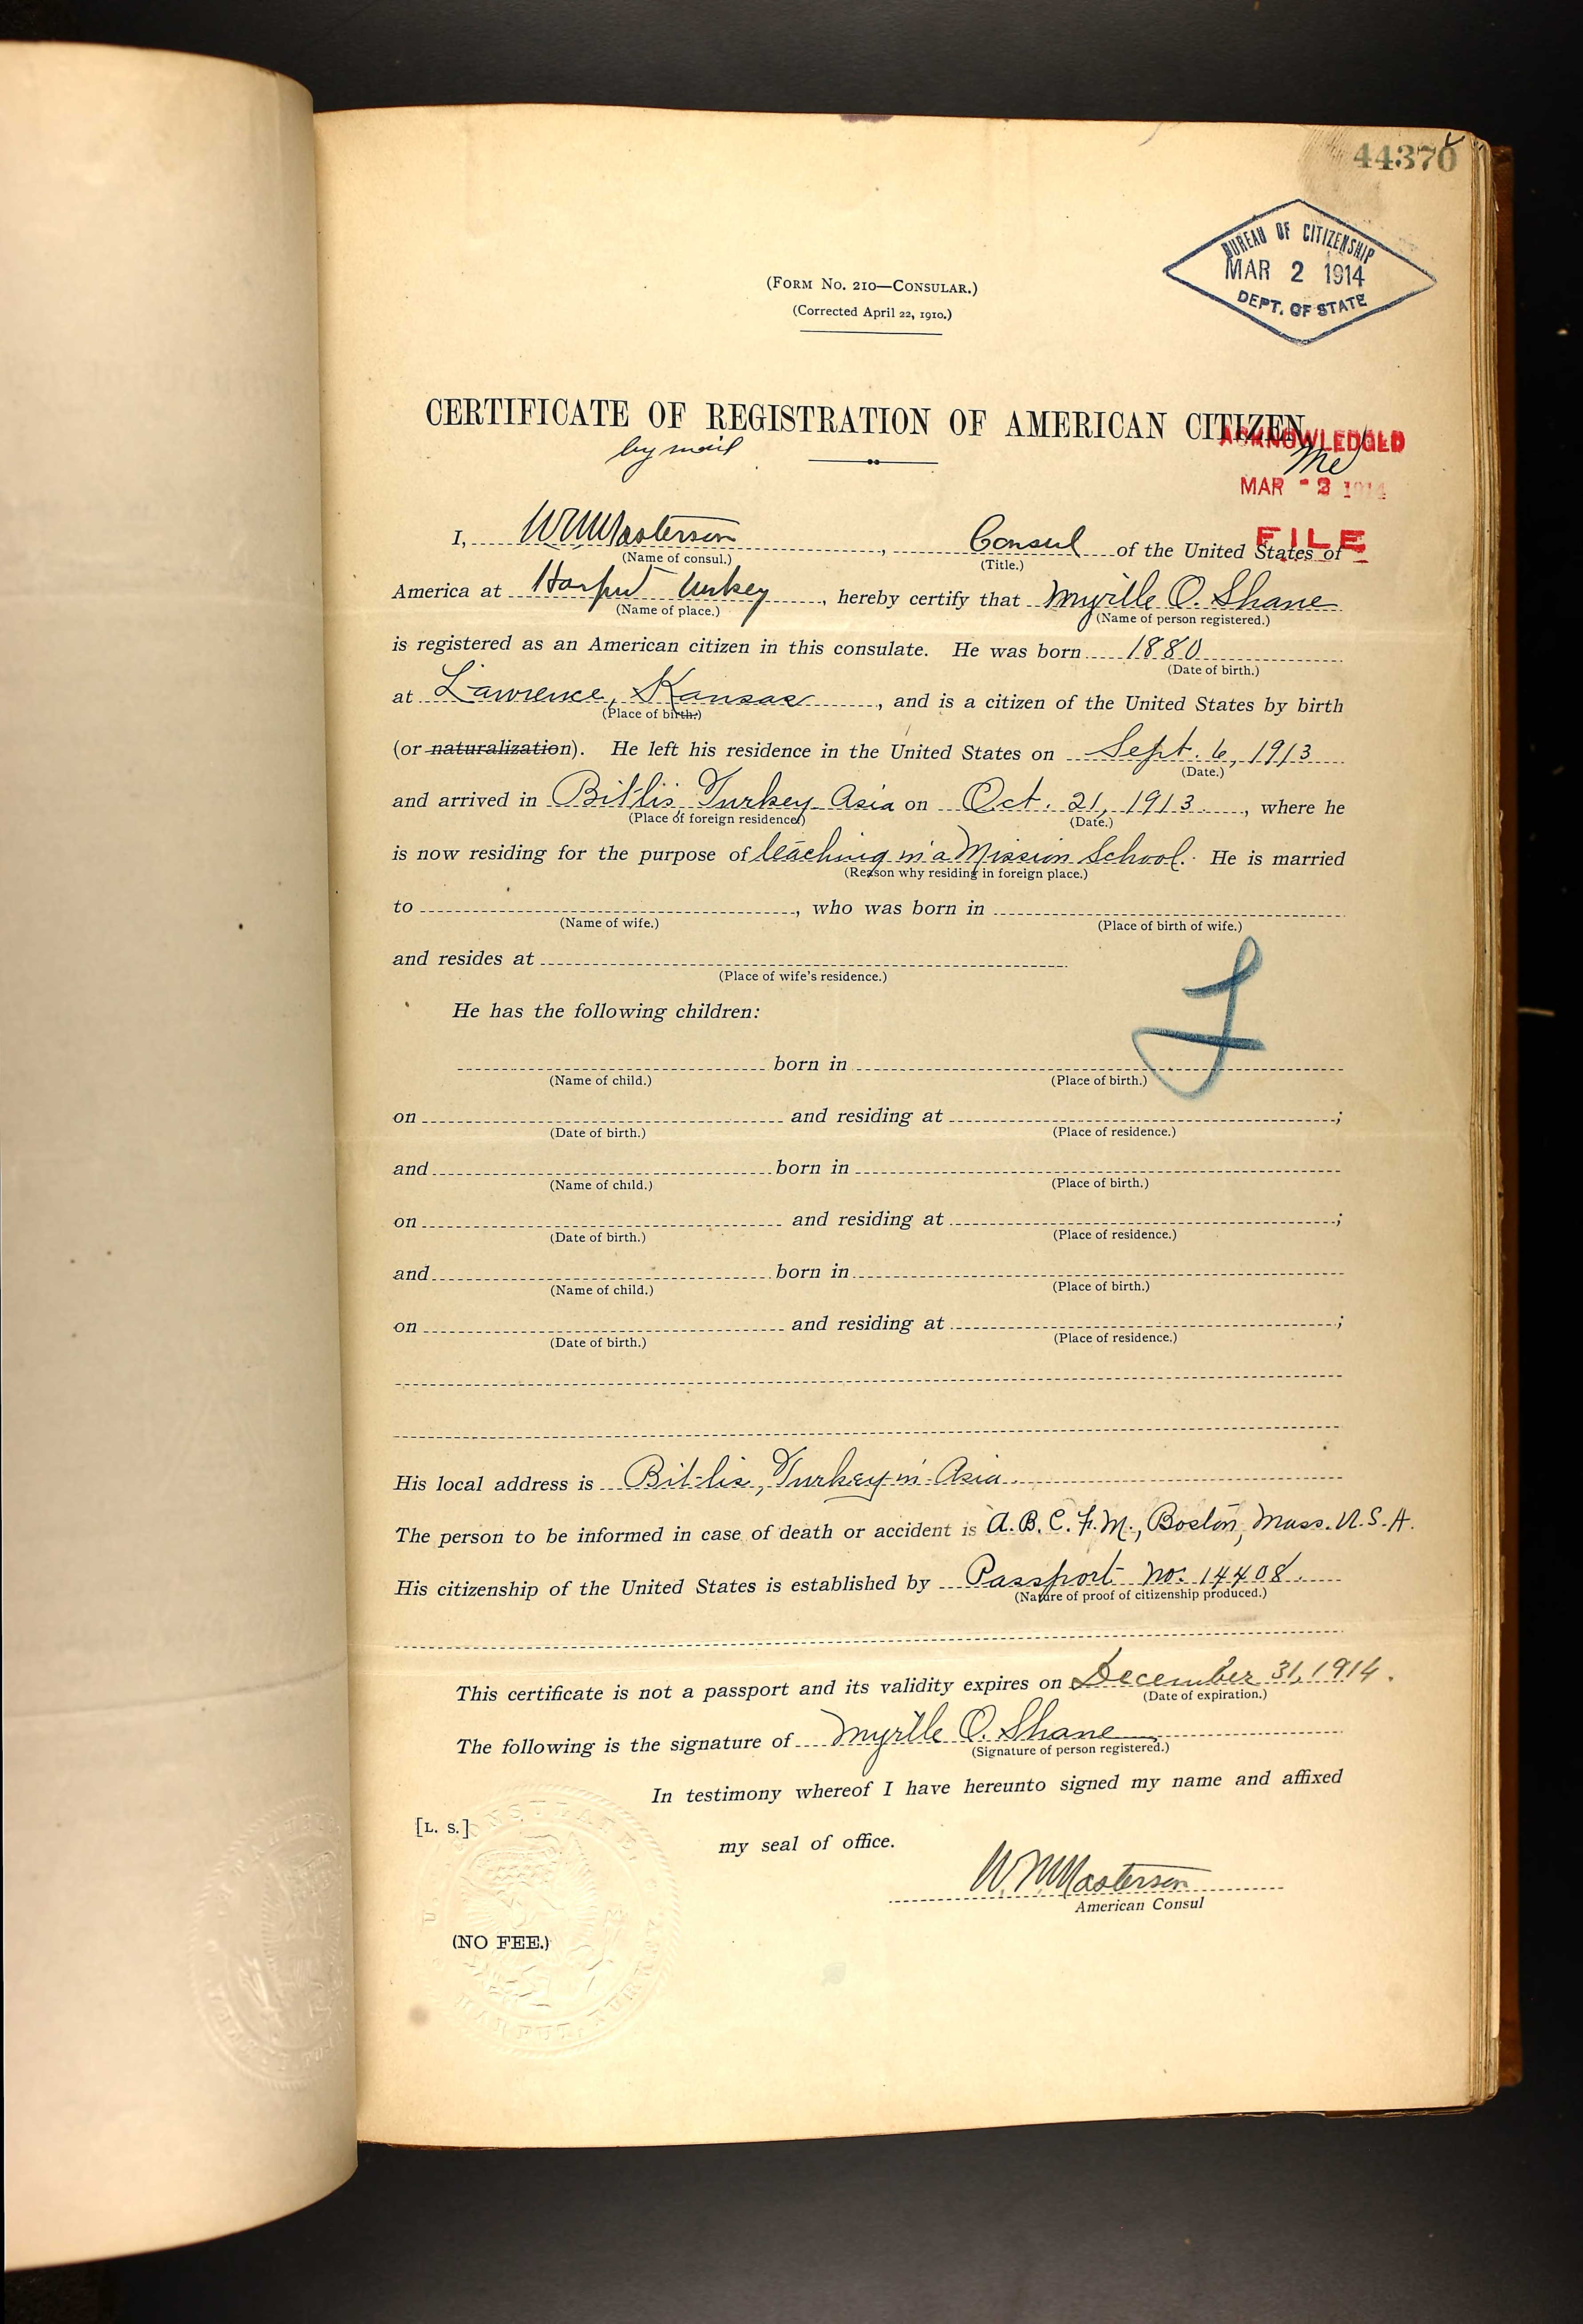 Ancestry.com, Certificate of Registration of American Citizenry, Myrtle O. Shane, 1913.